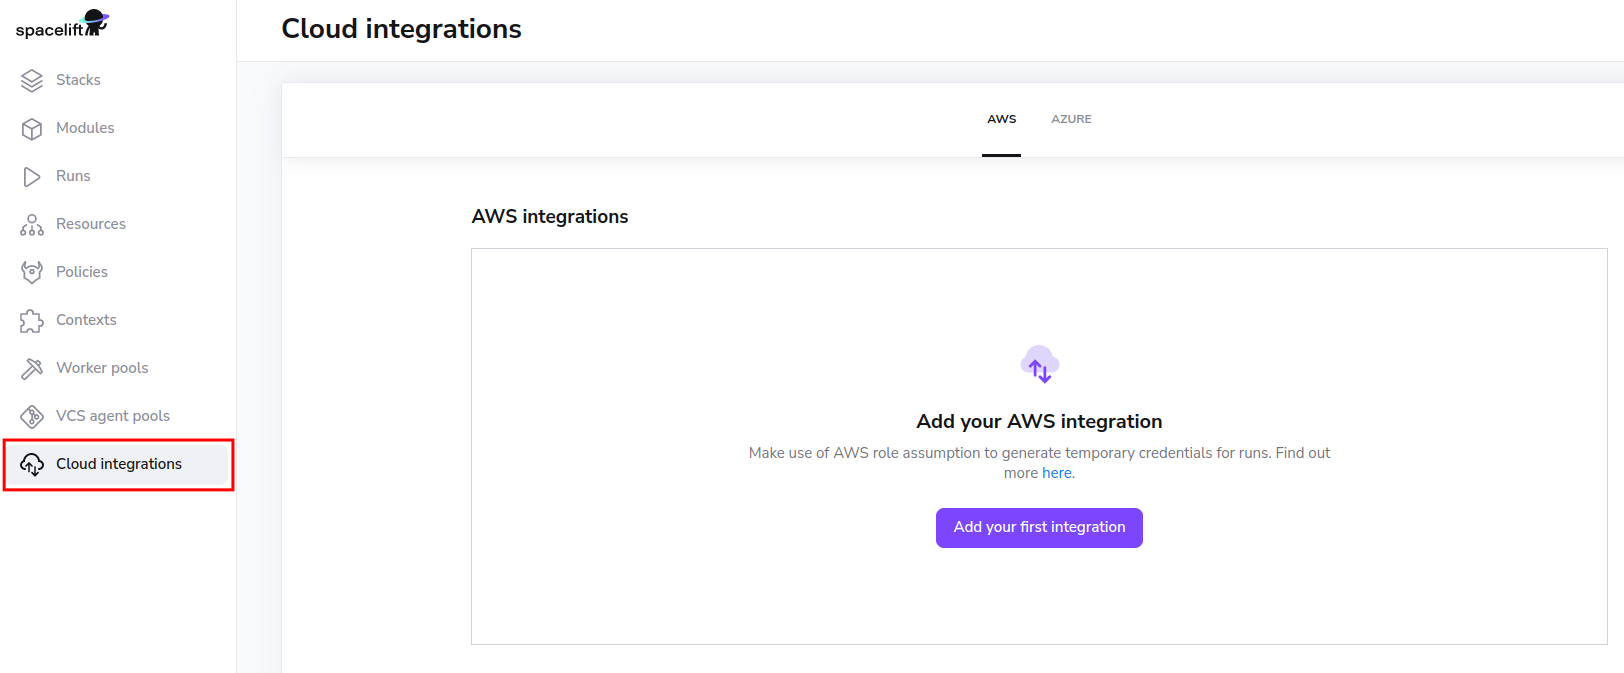 Navigate to the Cloud integrations page